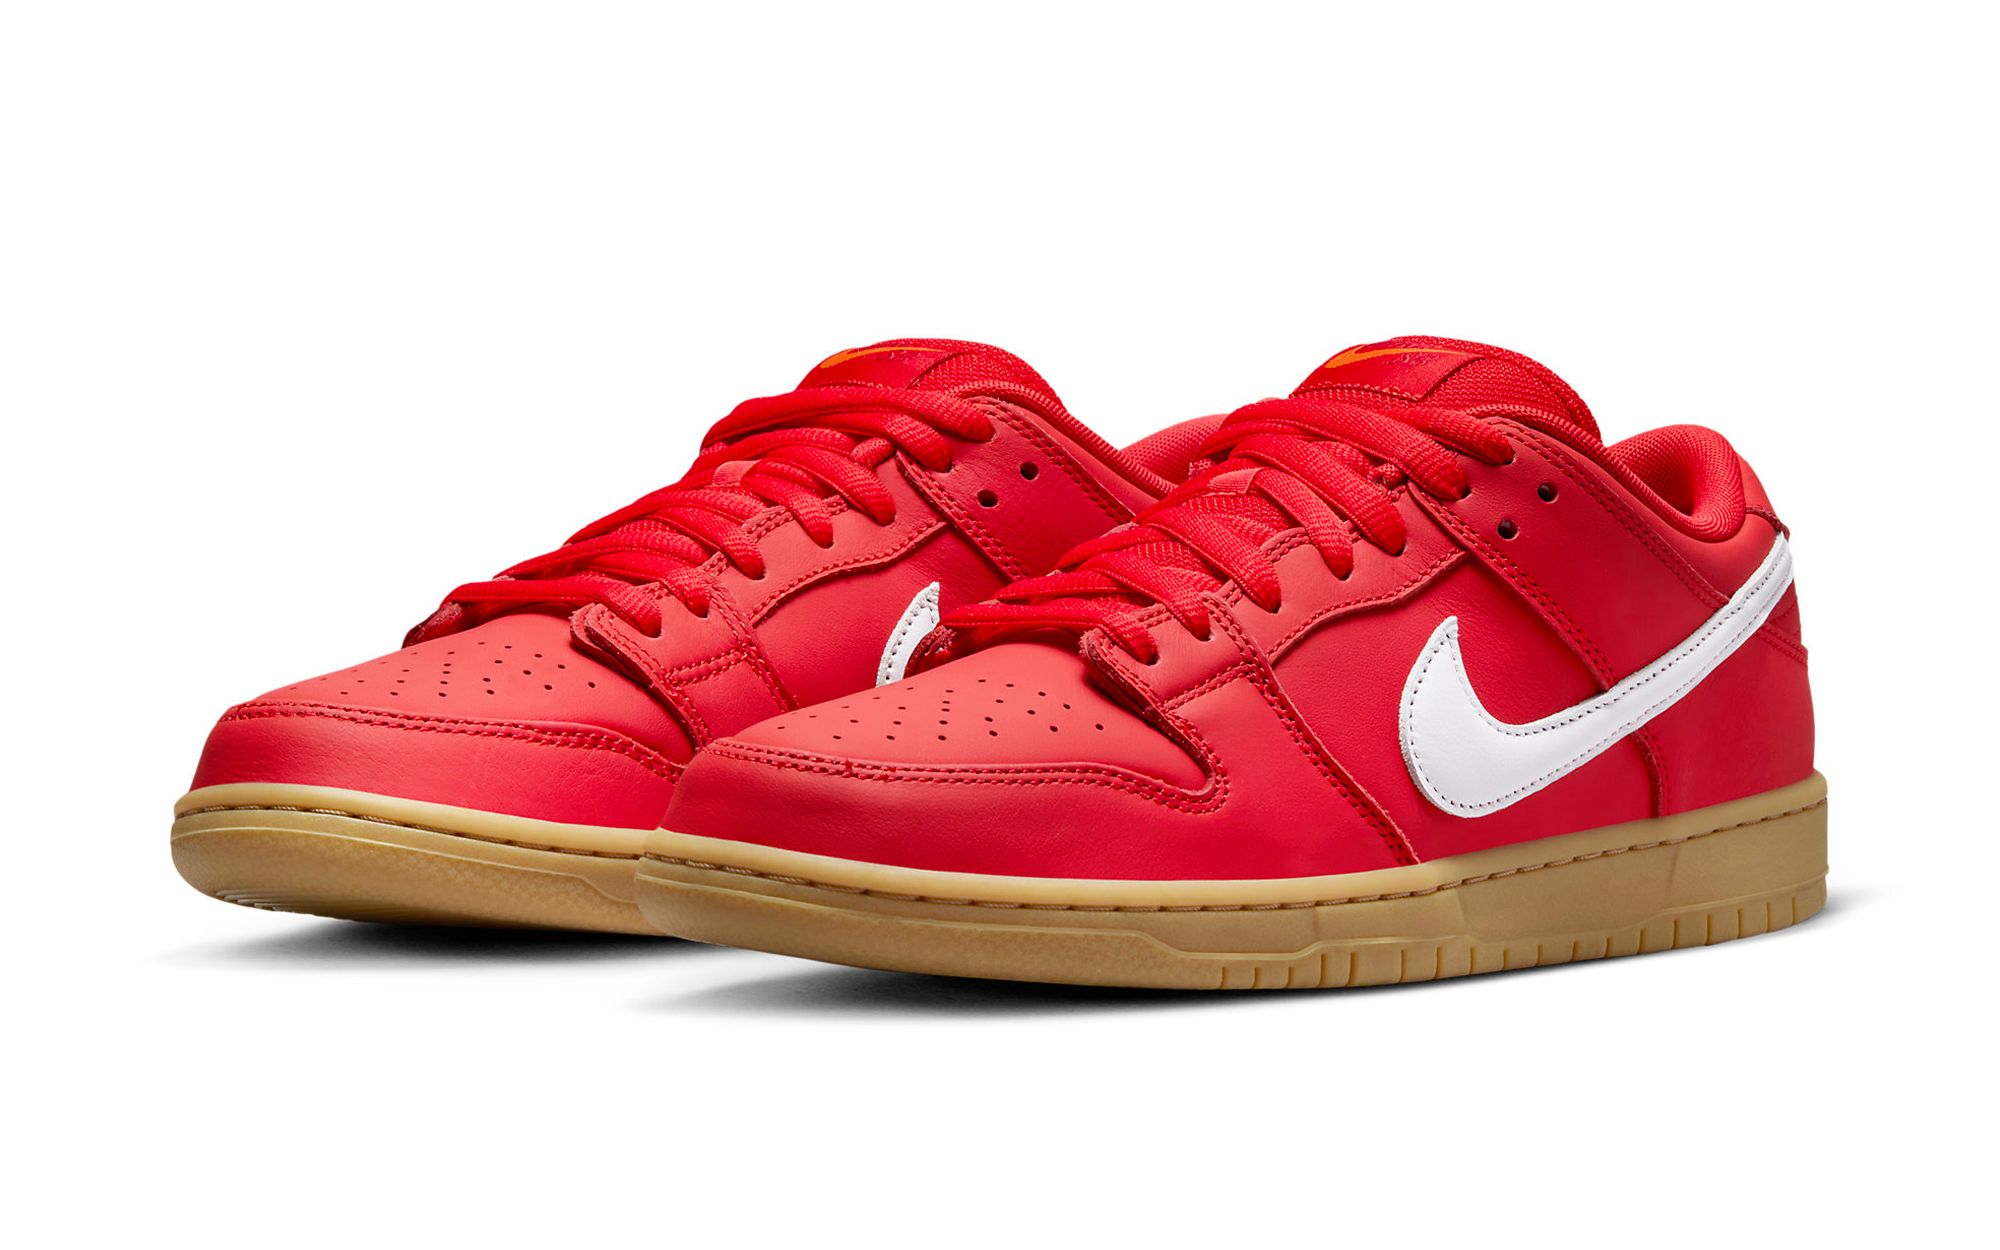 Official Images // Nike SB Dunk Low “Red Gum” | House of Heat°